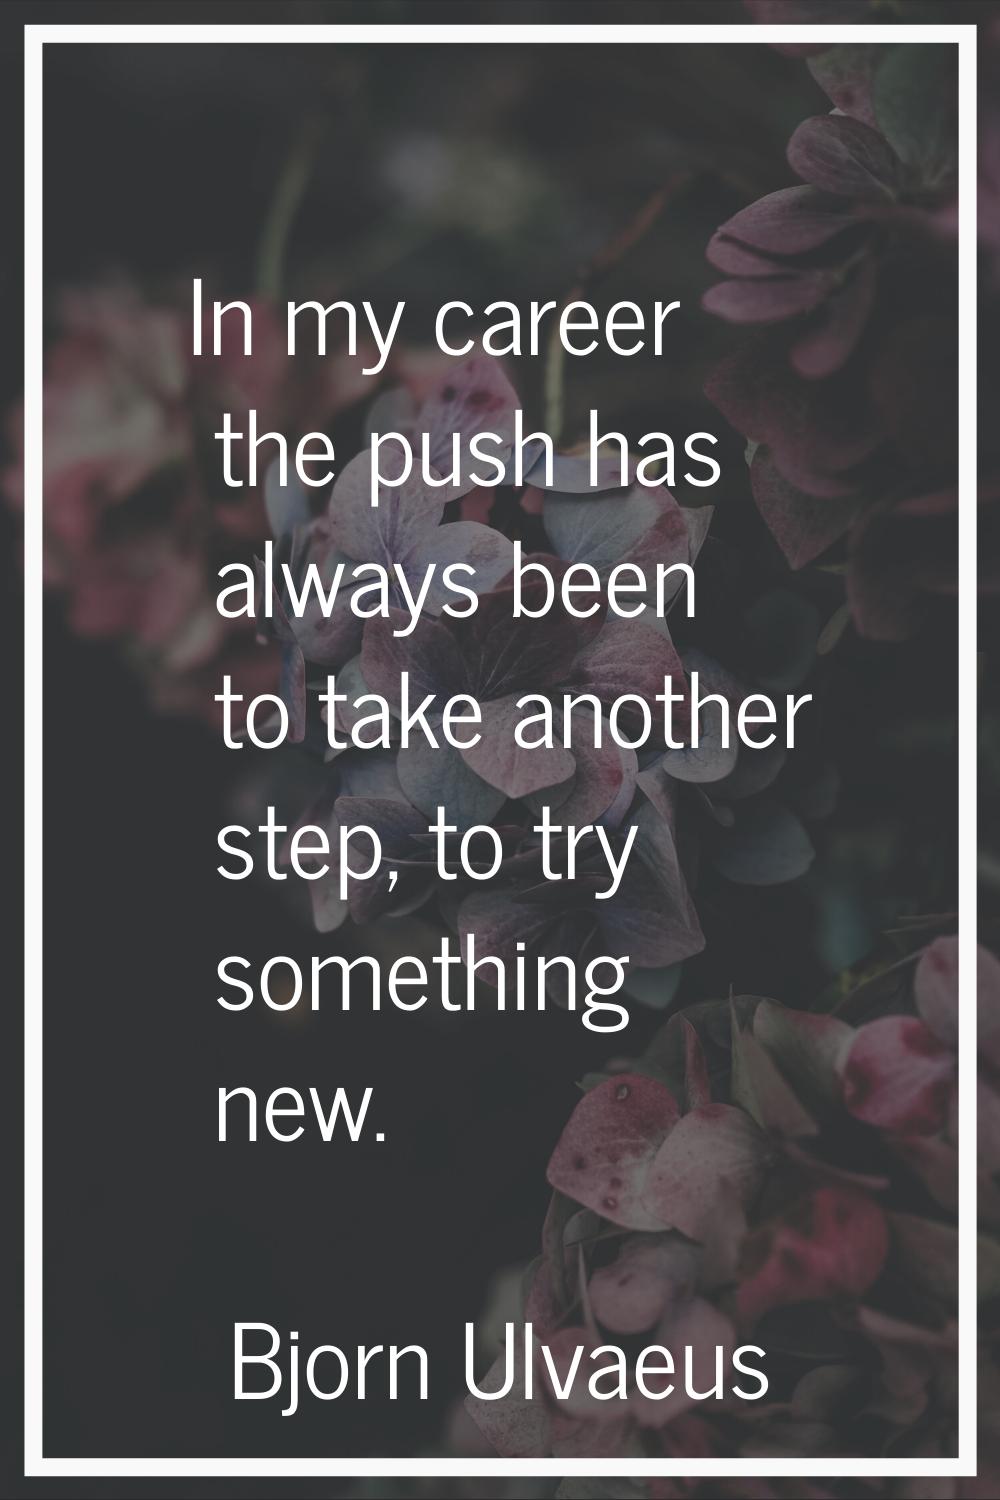 In my career the push has always been to take another step, to try something new.